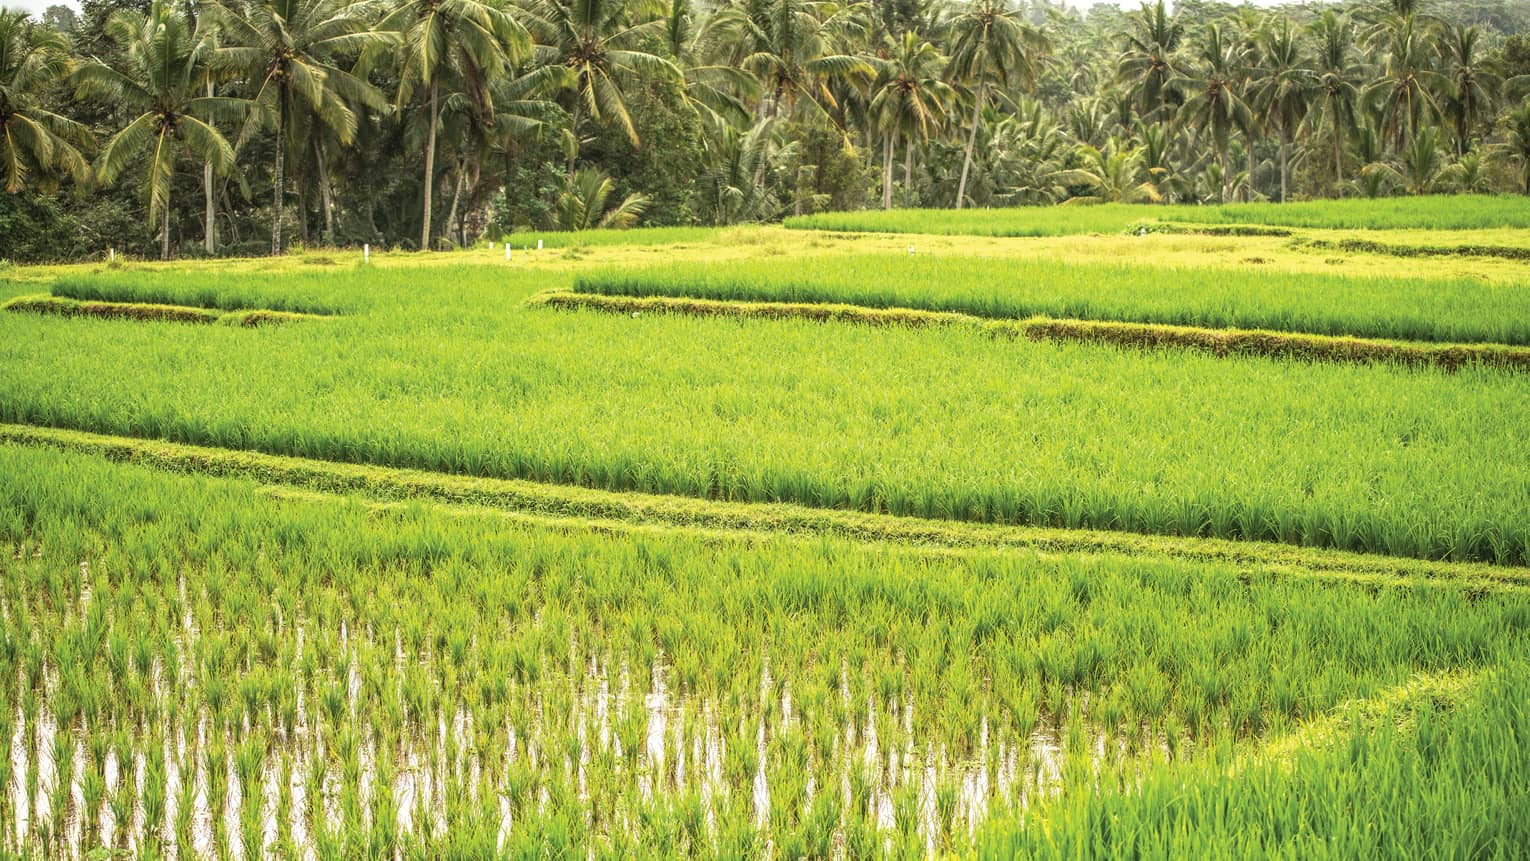 Bright green rice field in Bali, with palm trees at the edge of the field